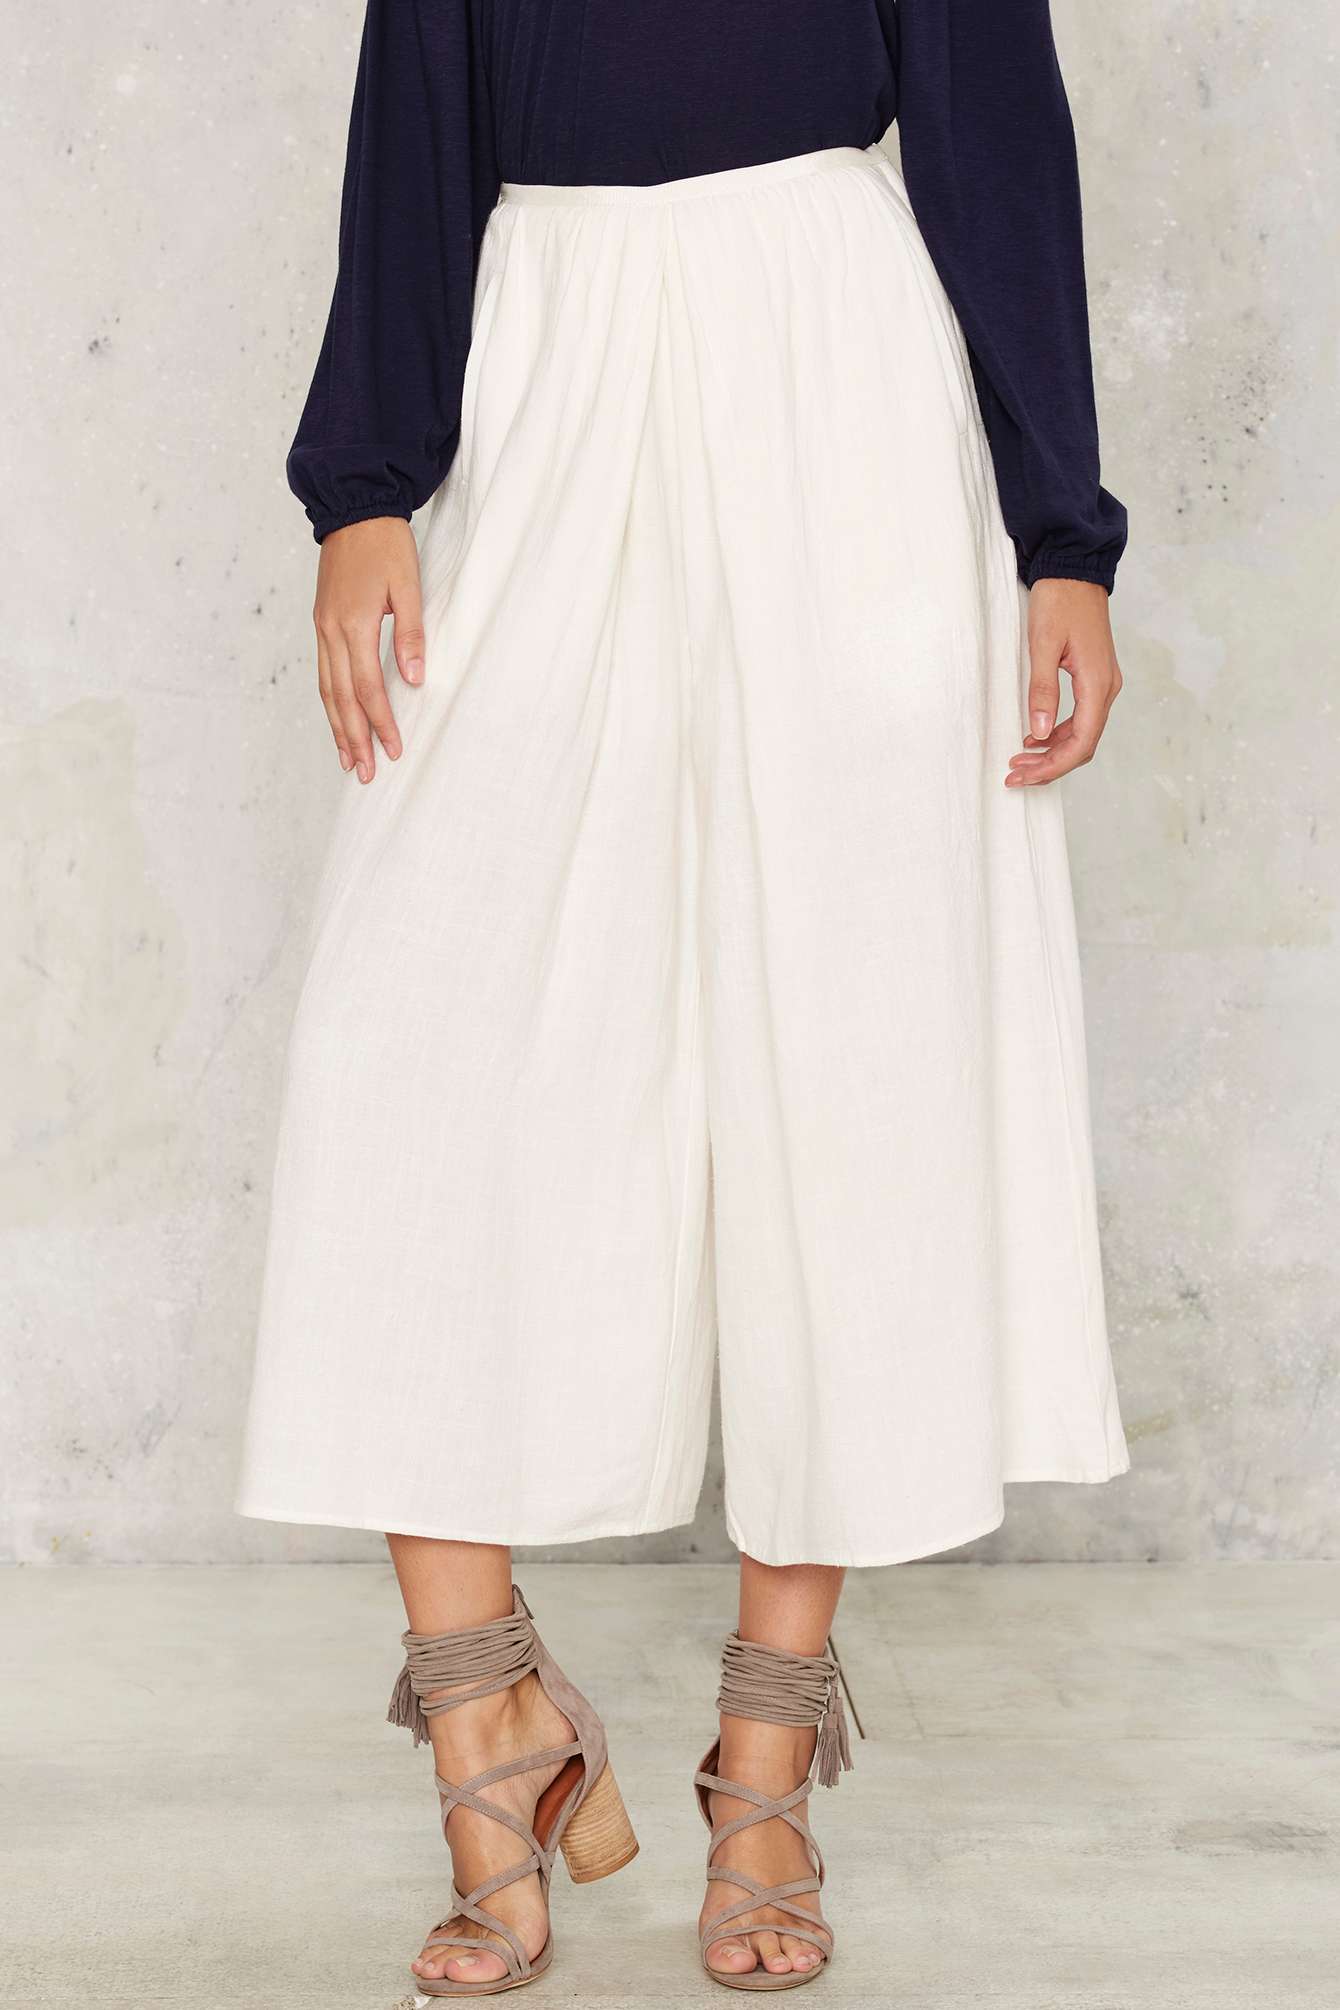 How to: Wear your Culottes During Winter - Pinkfo